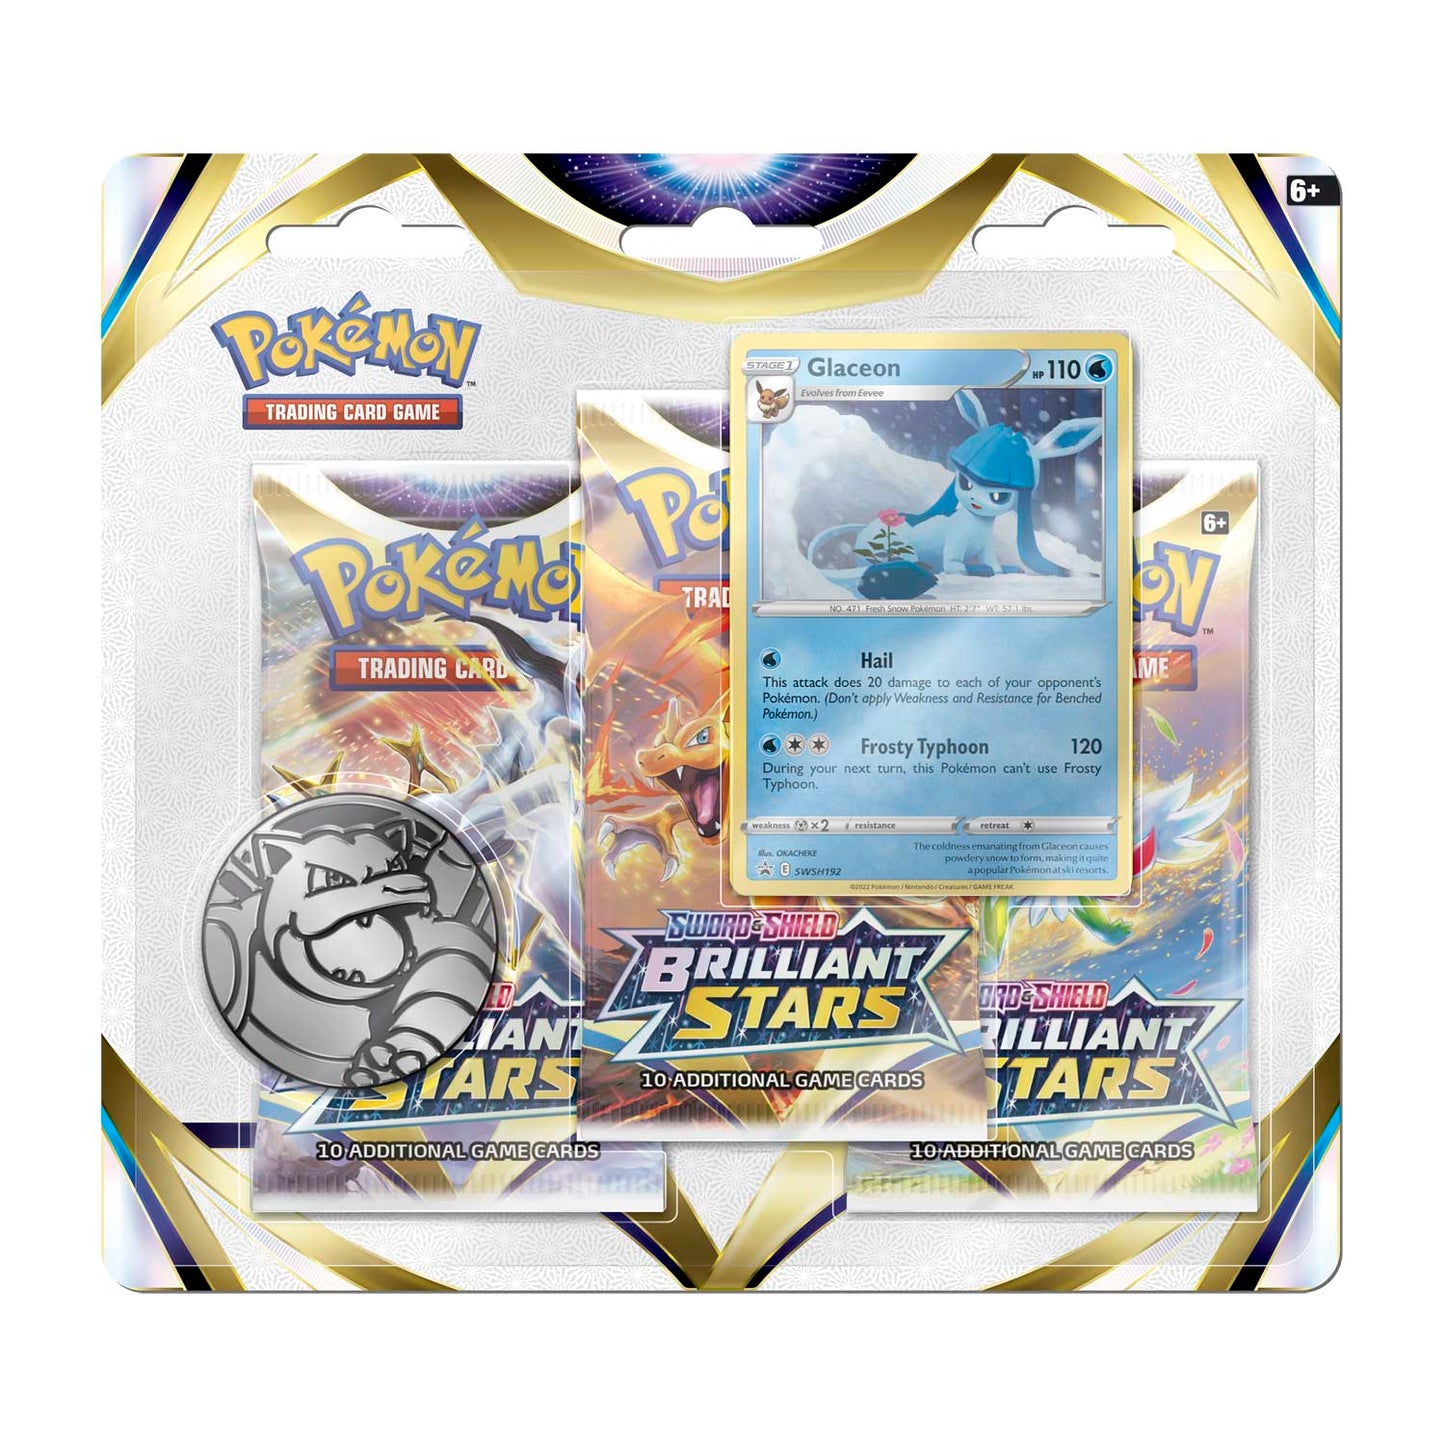 Brilliant Stars 3 Pack (Glaceon)